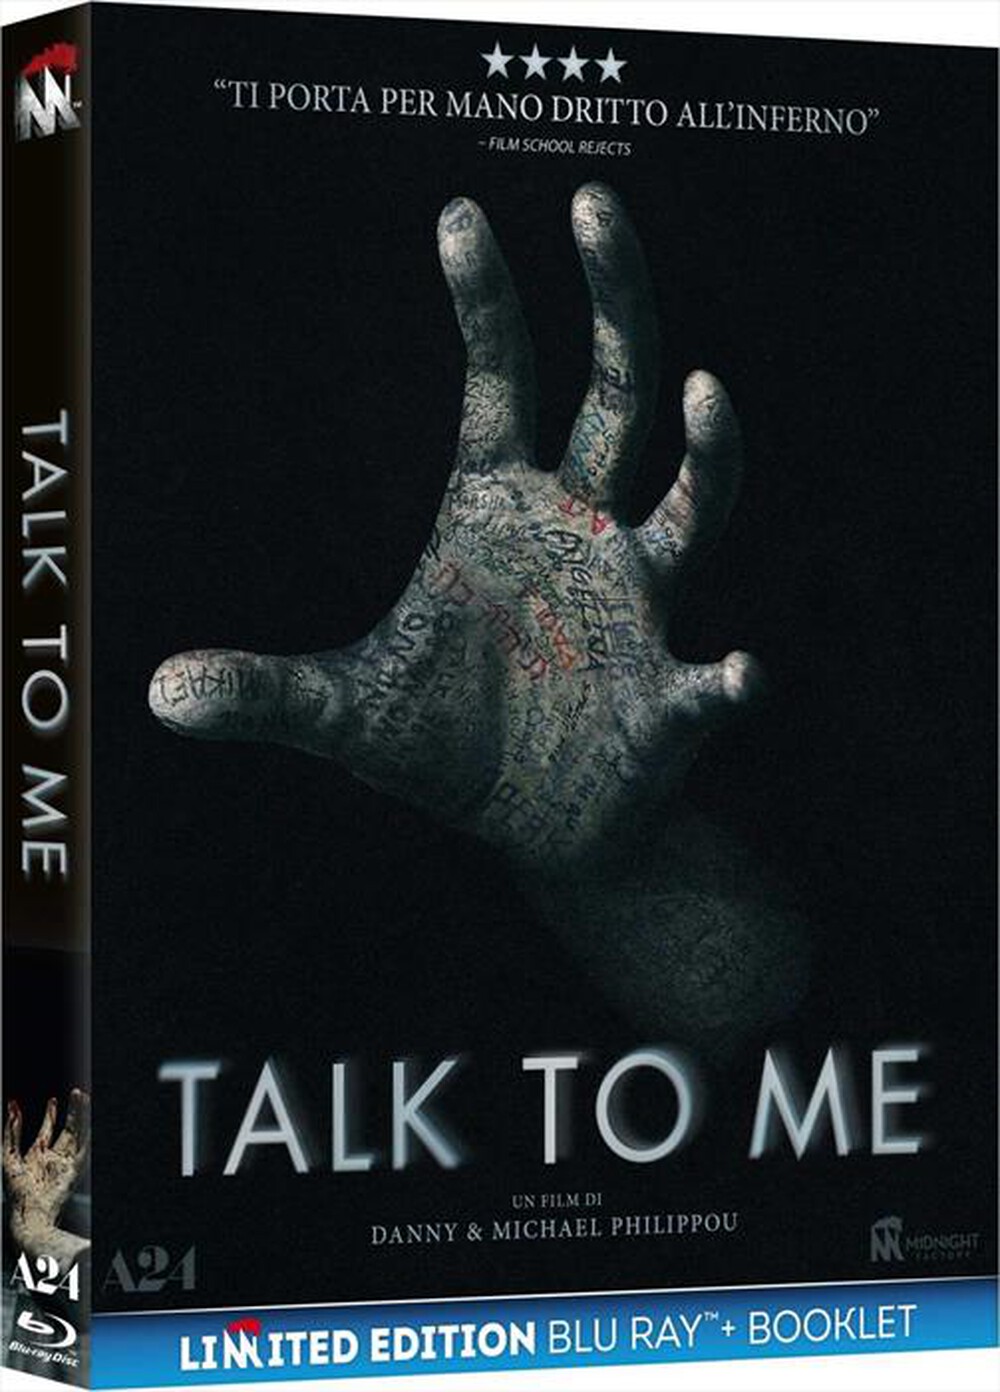 "Midnight Factory - Talk To Me (Blu-Ray+Booklet)"